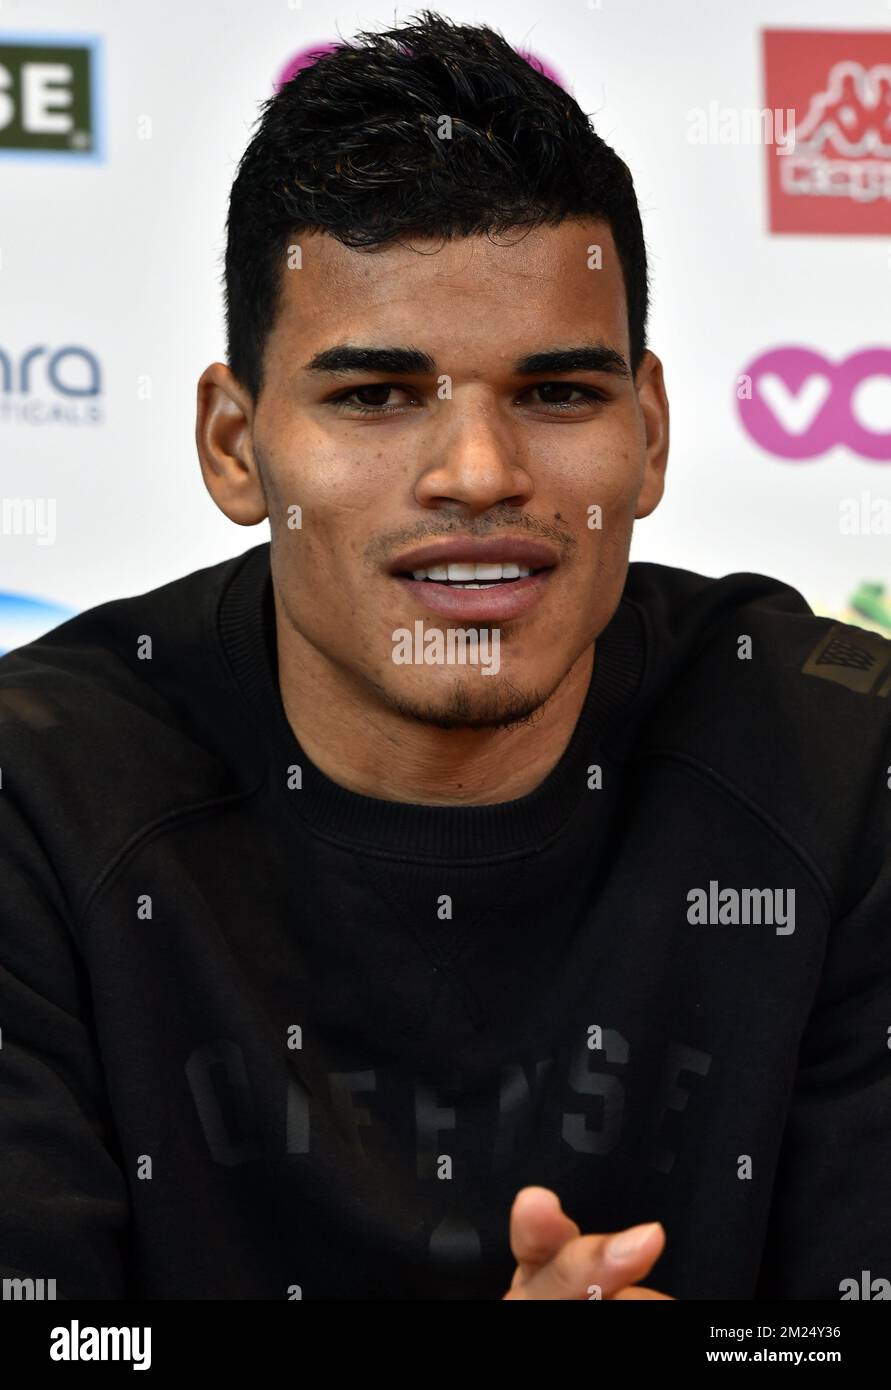 Standard's Danilo Barbosa pictured during a press conference of Belgian soccer team Standard de Liege to announce their latest transfer, Wednesday 01 February 2017, in Liege. Danilo Barbosa da Silva, simply known as Danilo, is a Brazilian defensive midfielder coming over from Braga on a loan deal. BELGA PHOTO ERIC LALMAND Stock Photo